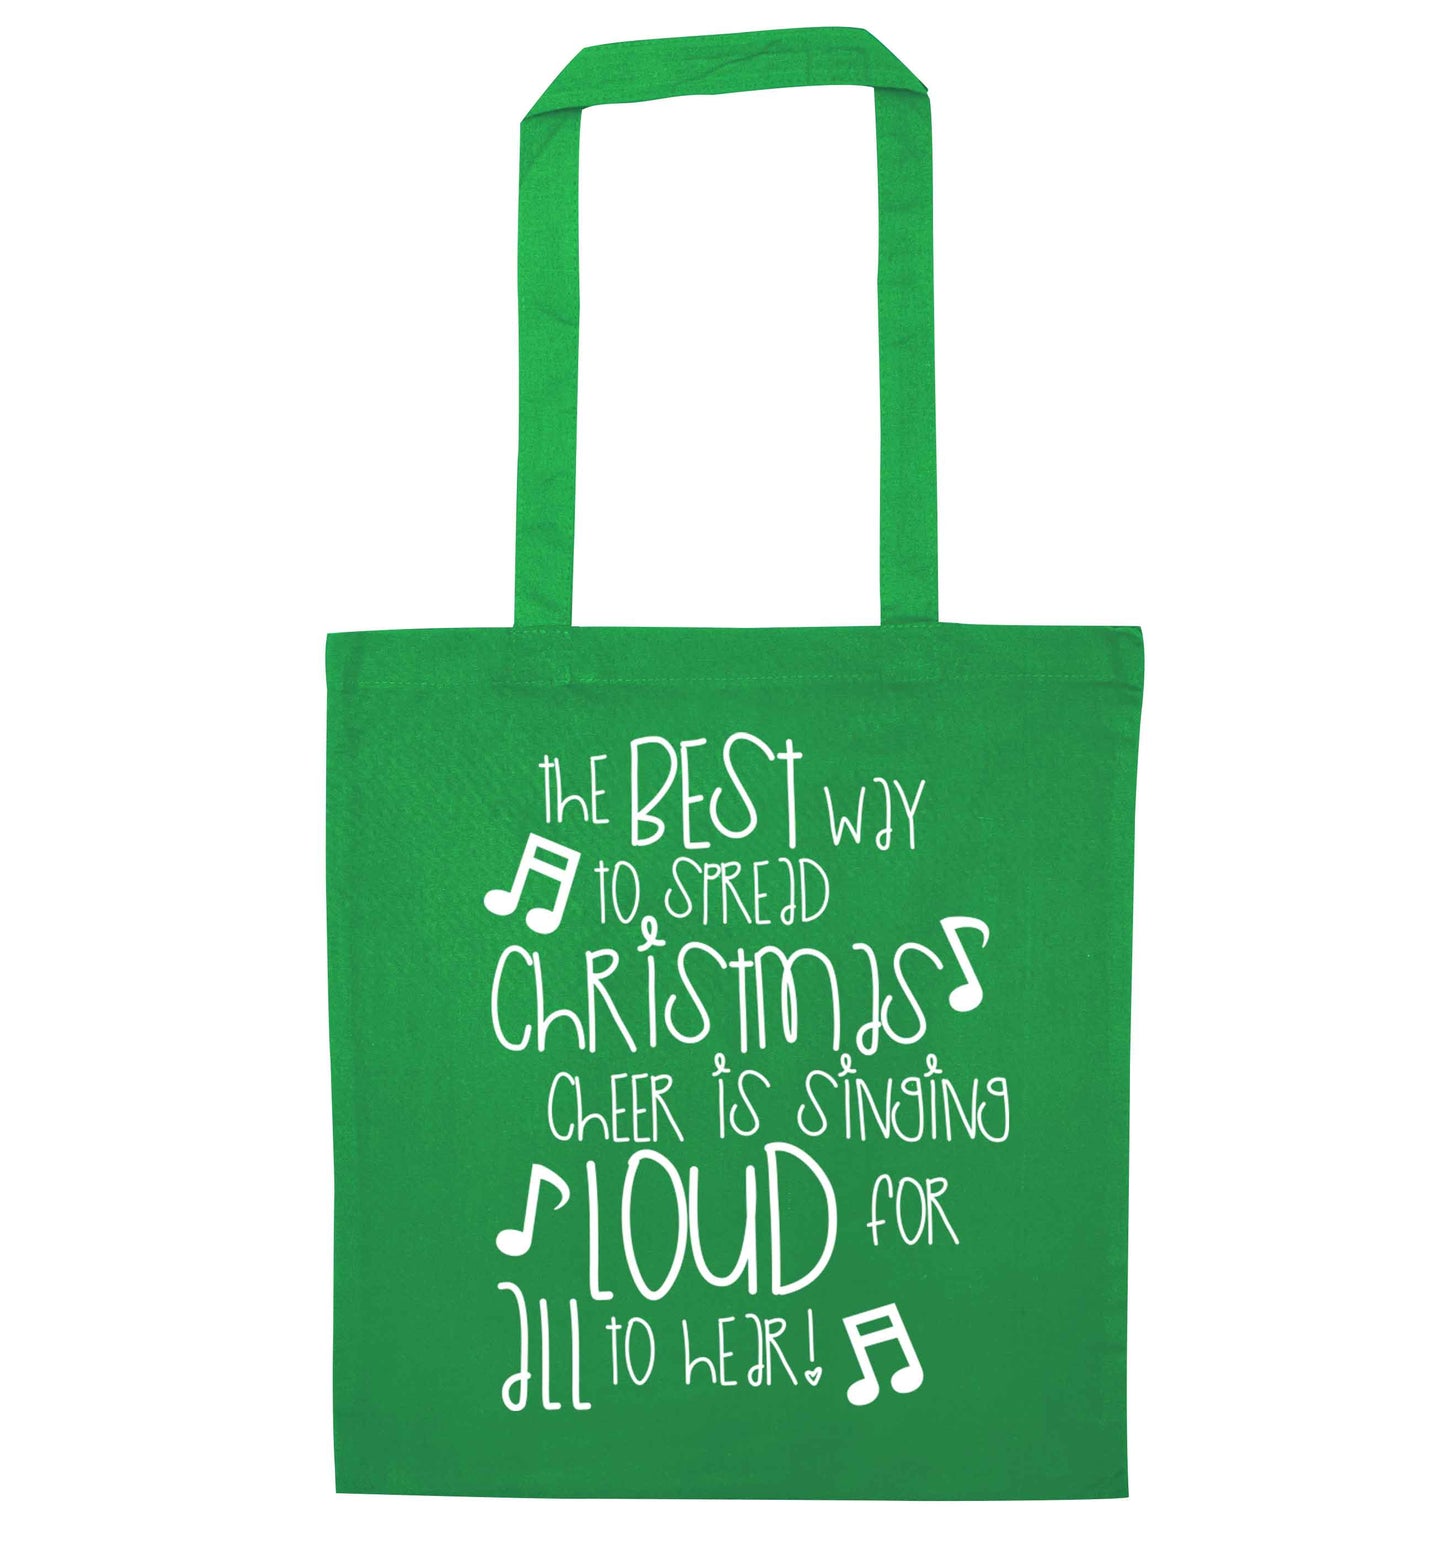 The best way to spread Christmas cheer is singing loud for all to hear green tote bag